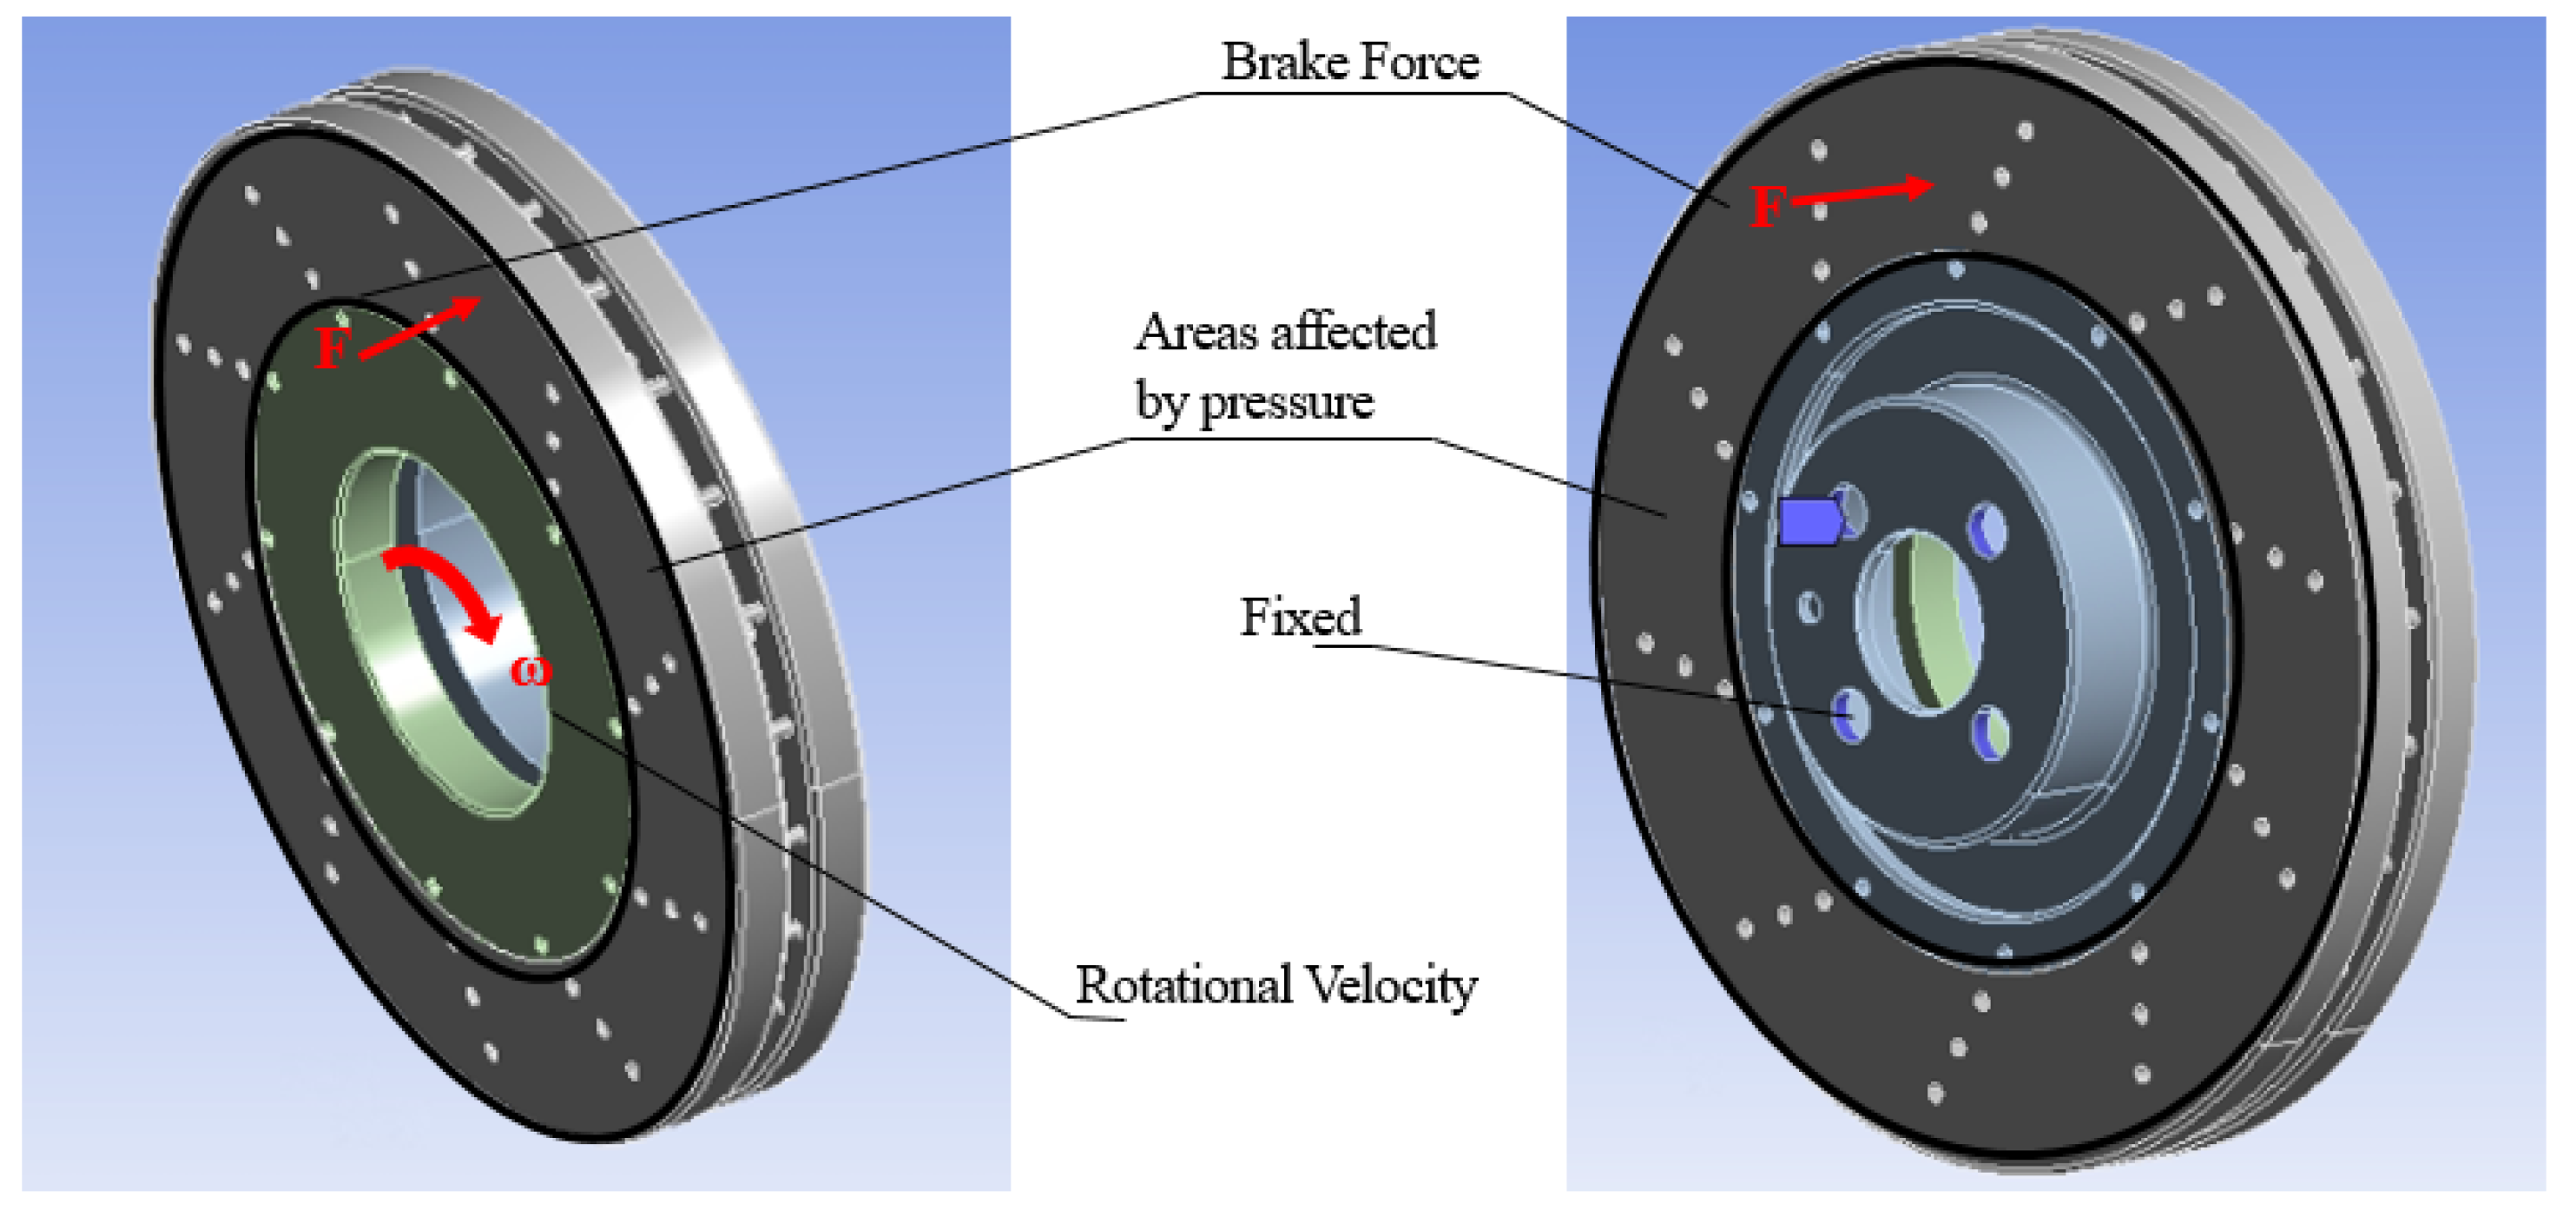 Vapor Lock And Fading: What Are They And How Do They Affect Brakes?